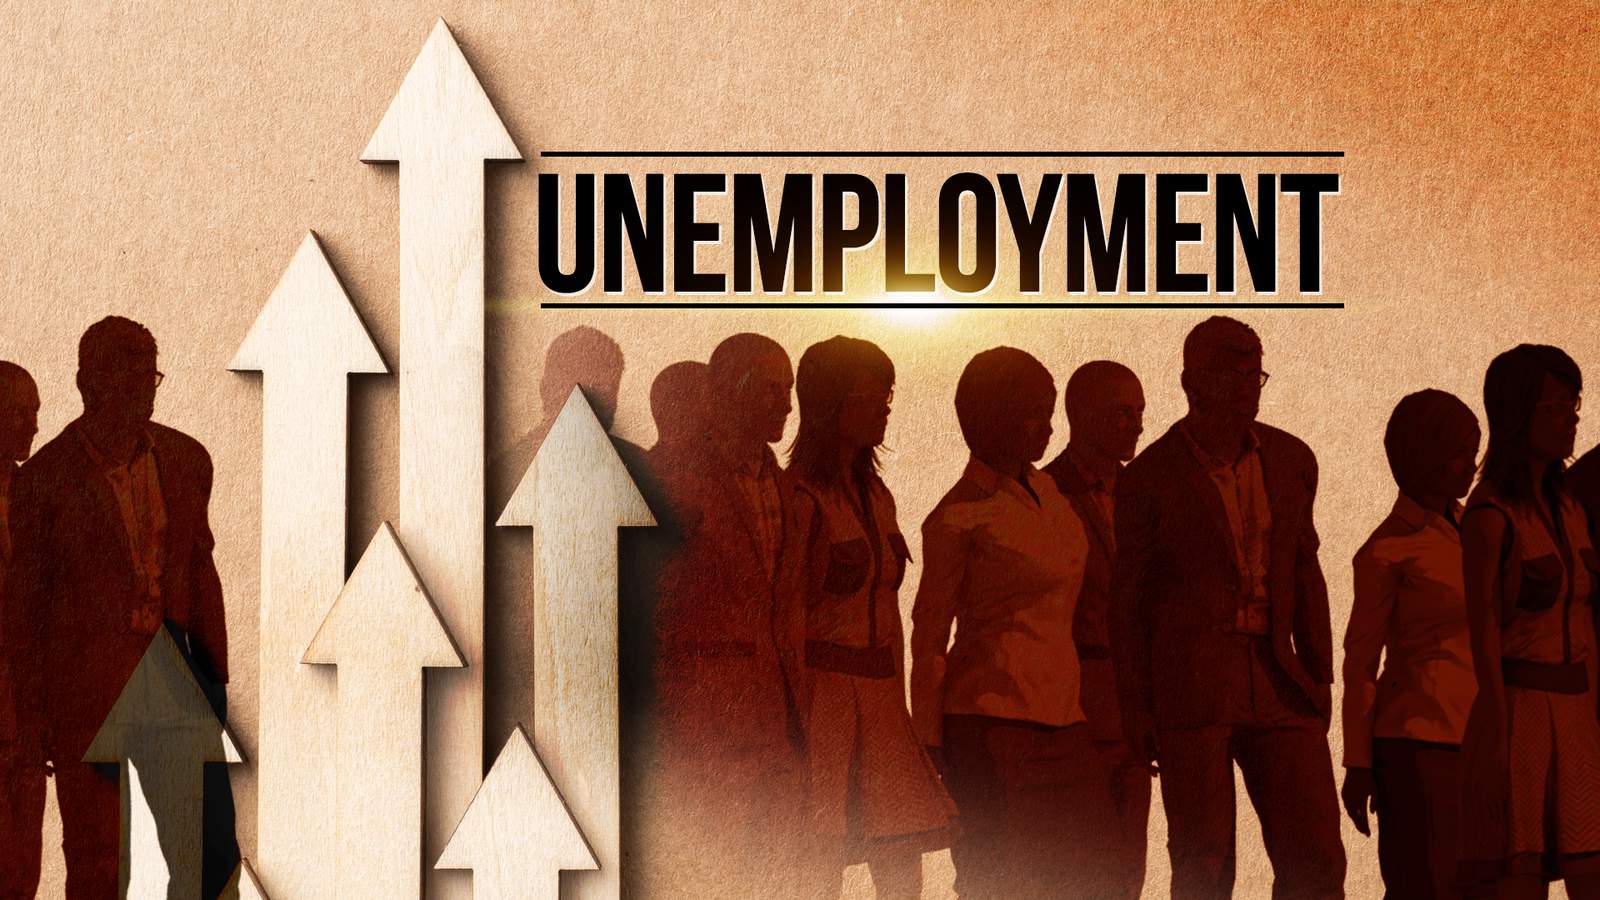 More than 110,000 Virginians filed for unemployment last week